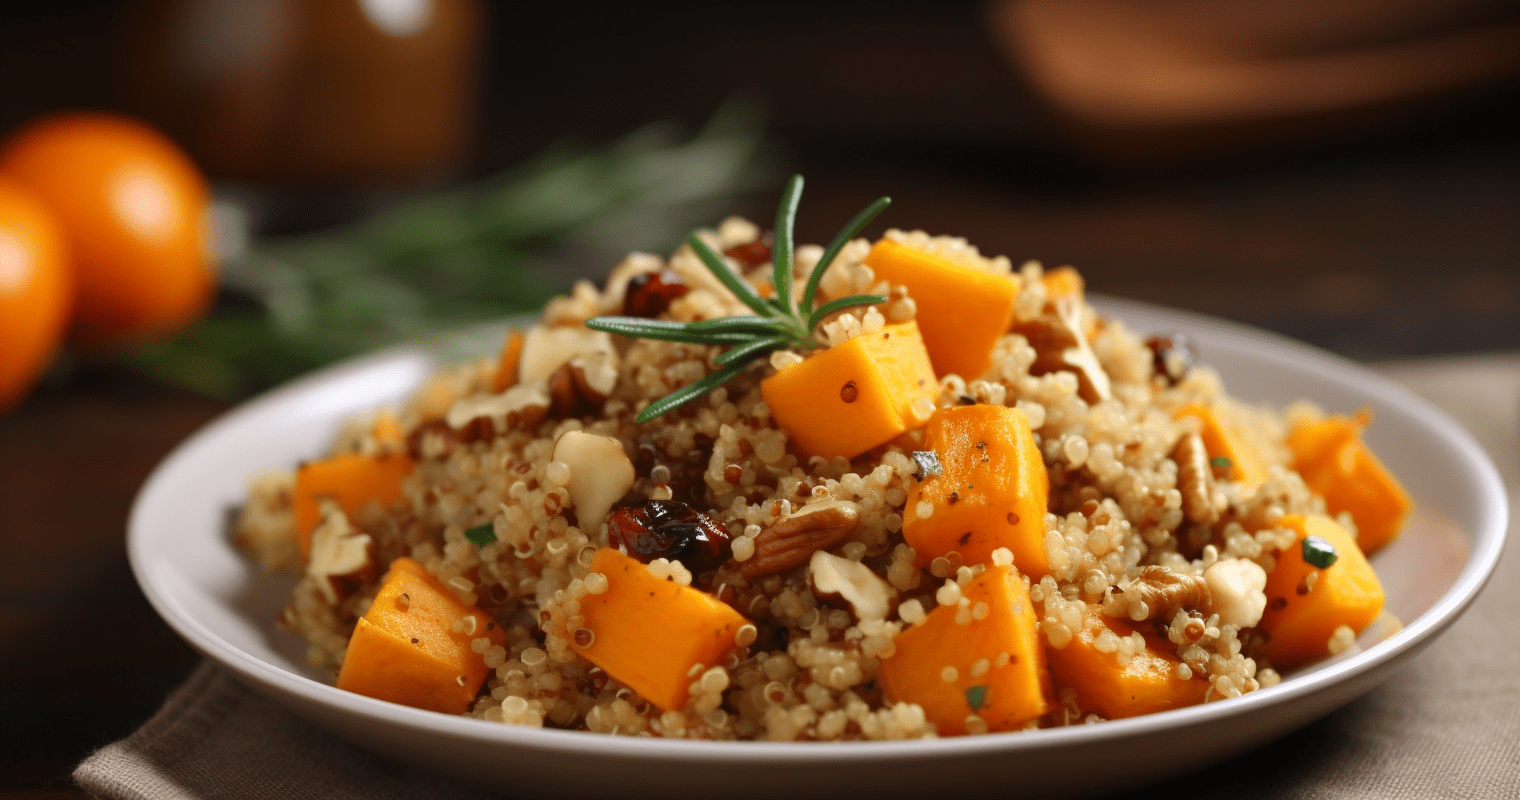 Experience the Timeless Flavors of Roasted Butternut Squash and Quinoa Salad